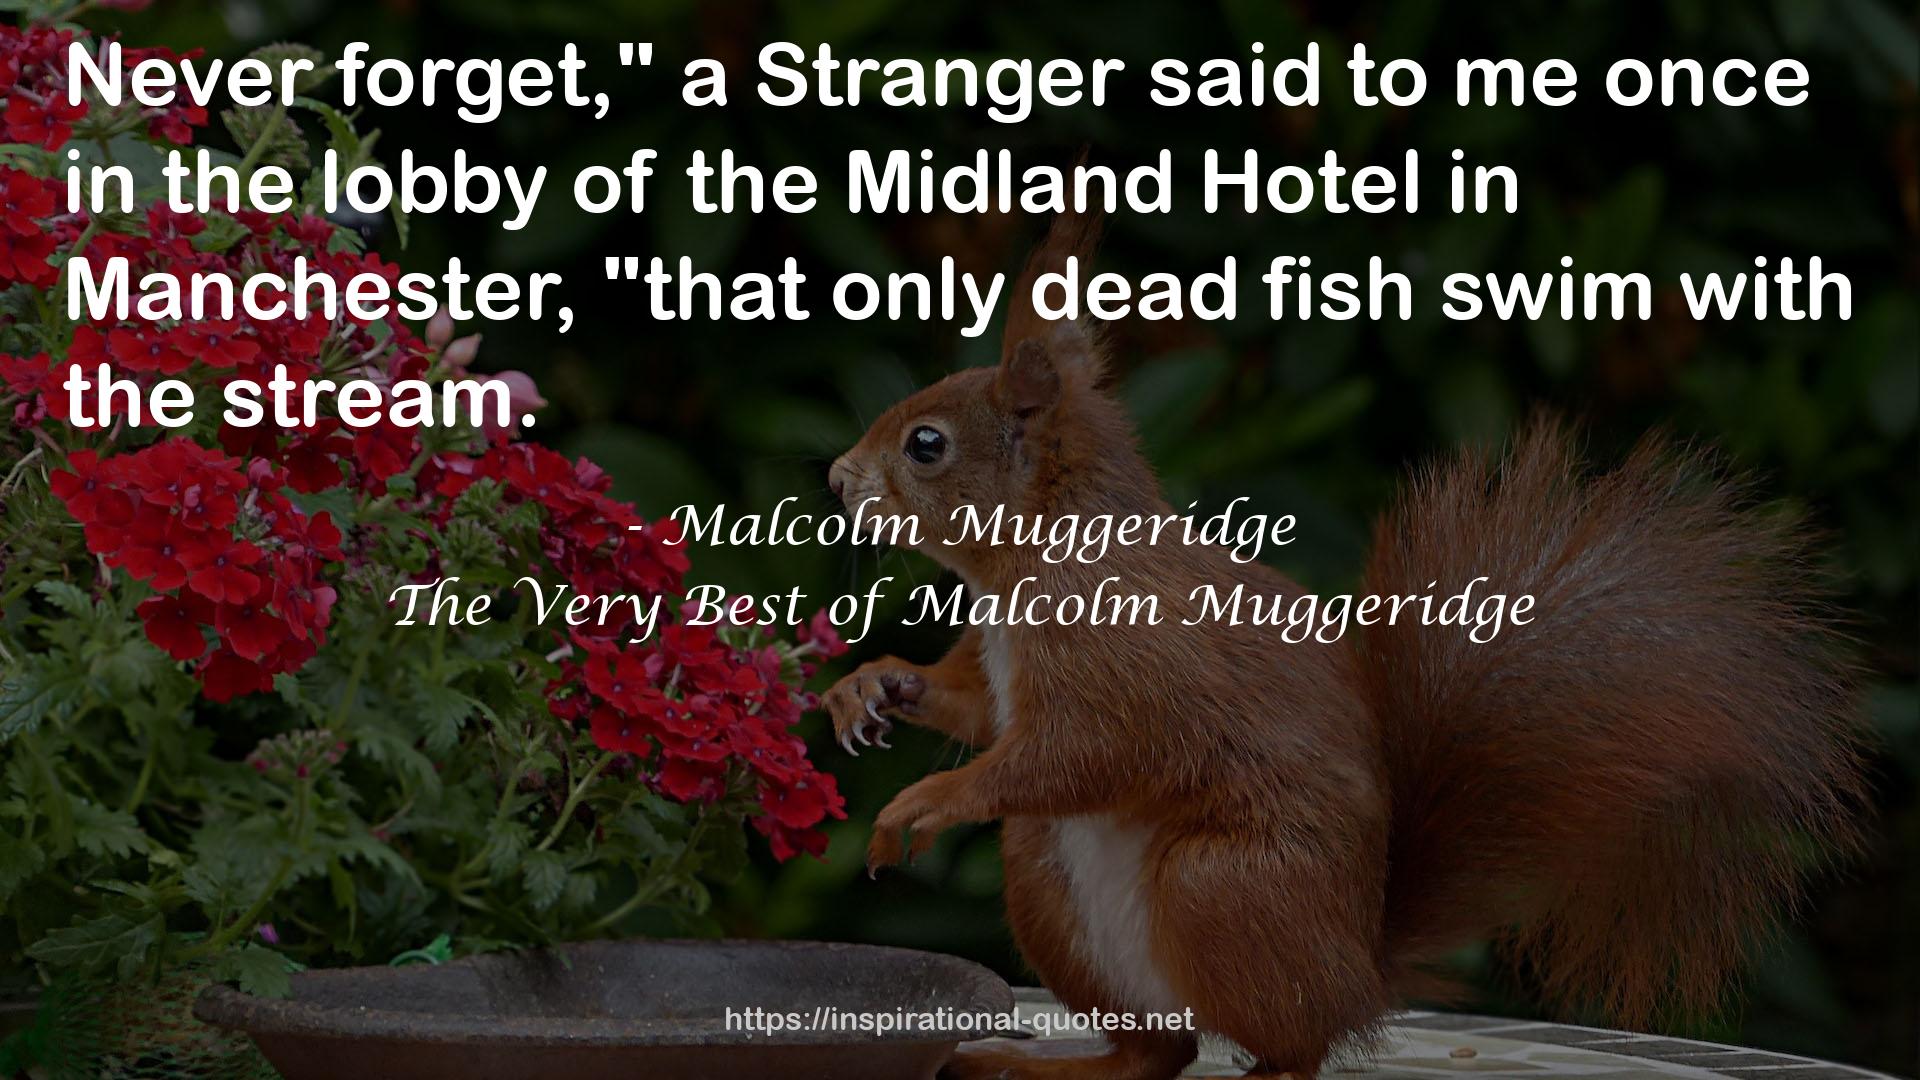 The Very Best of Malcolm Muggeridge QUOTES